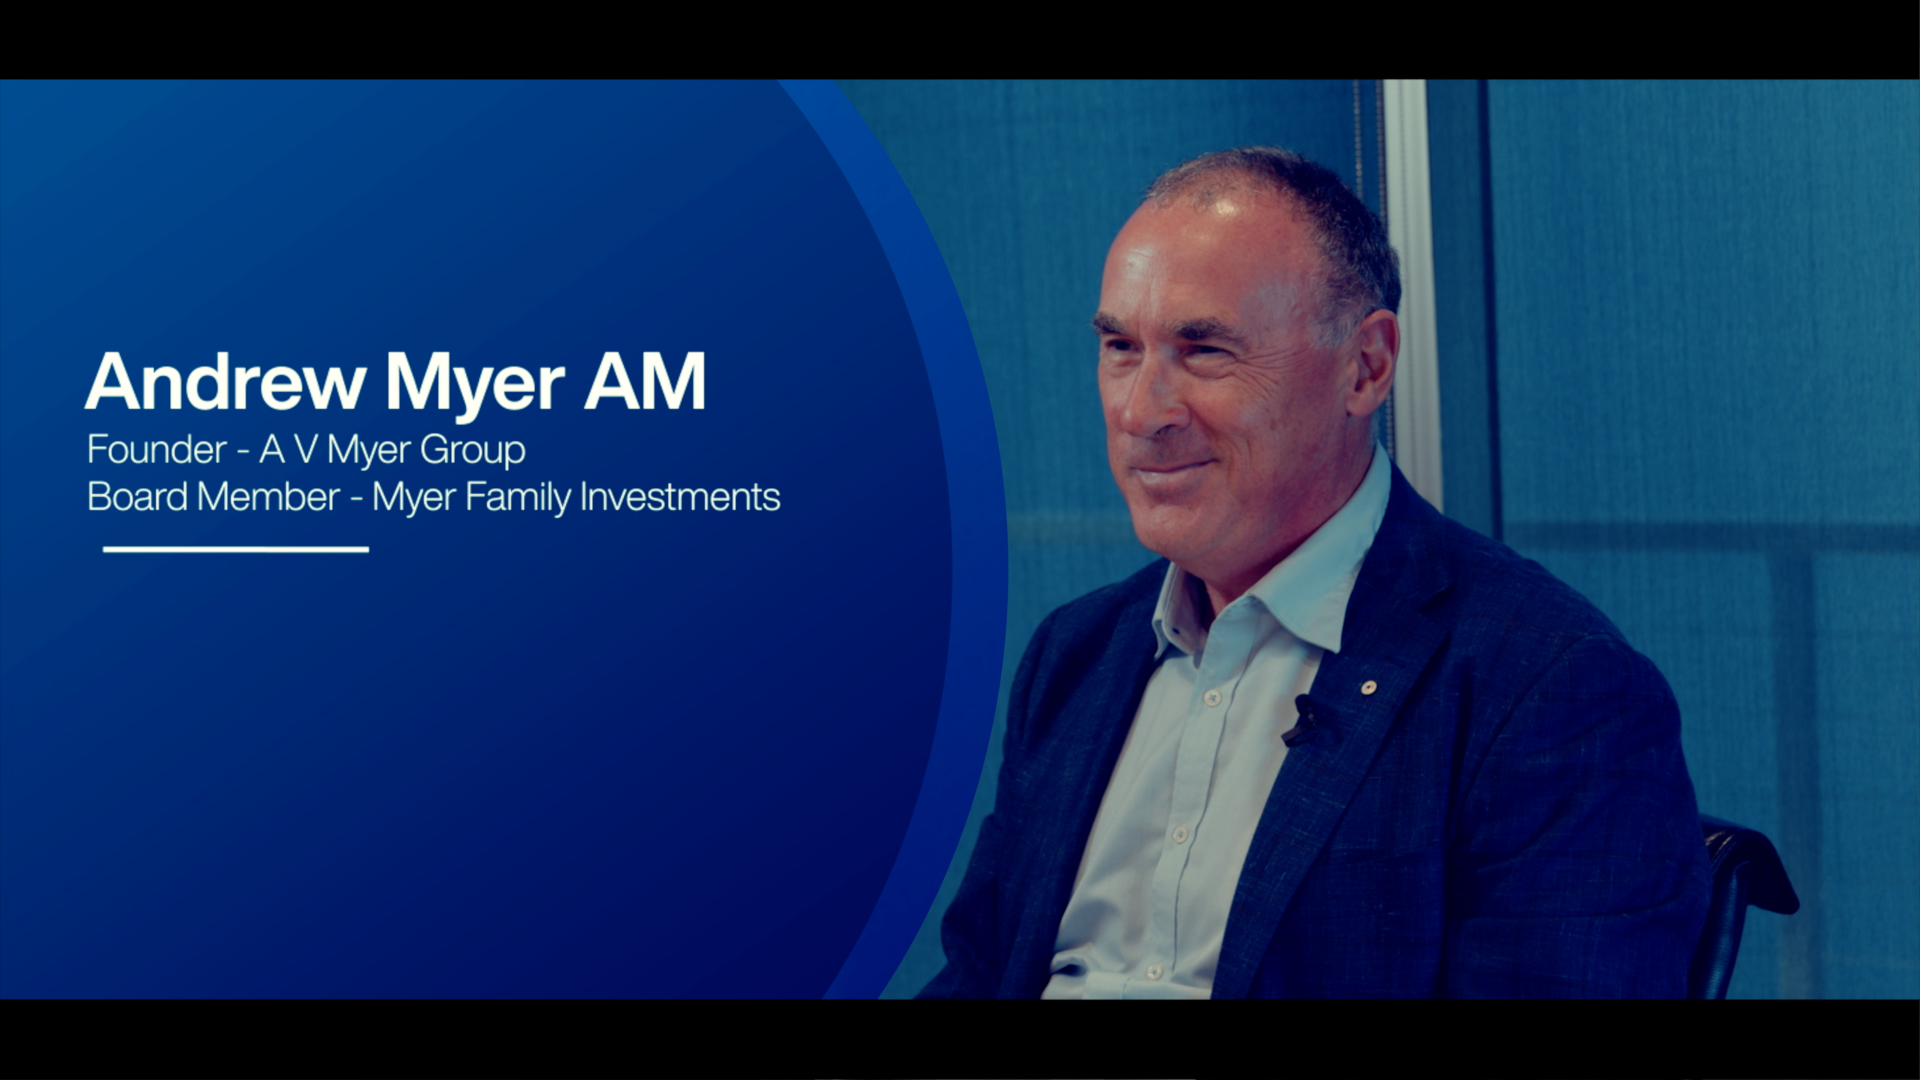 Andrew Myer AM - Myer Family Investments